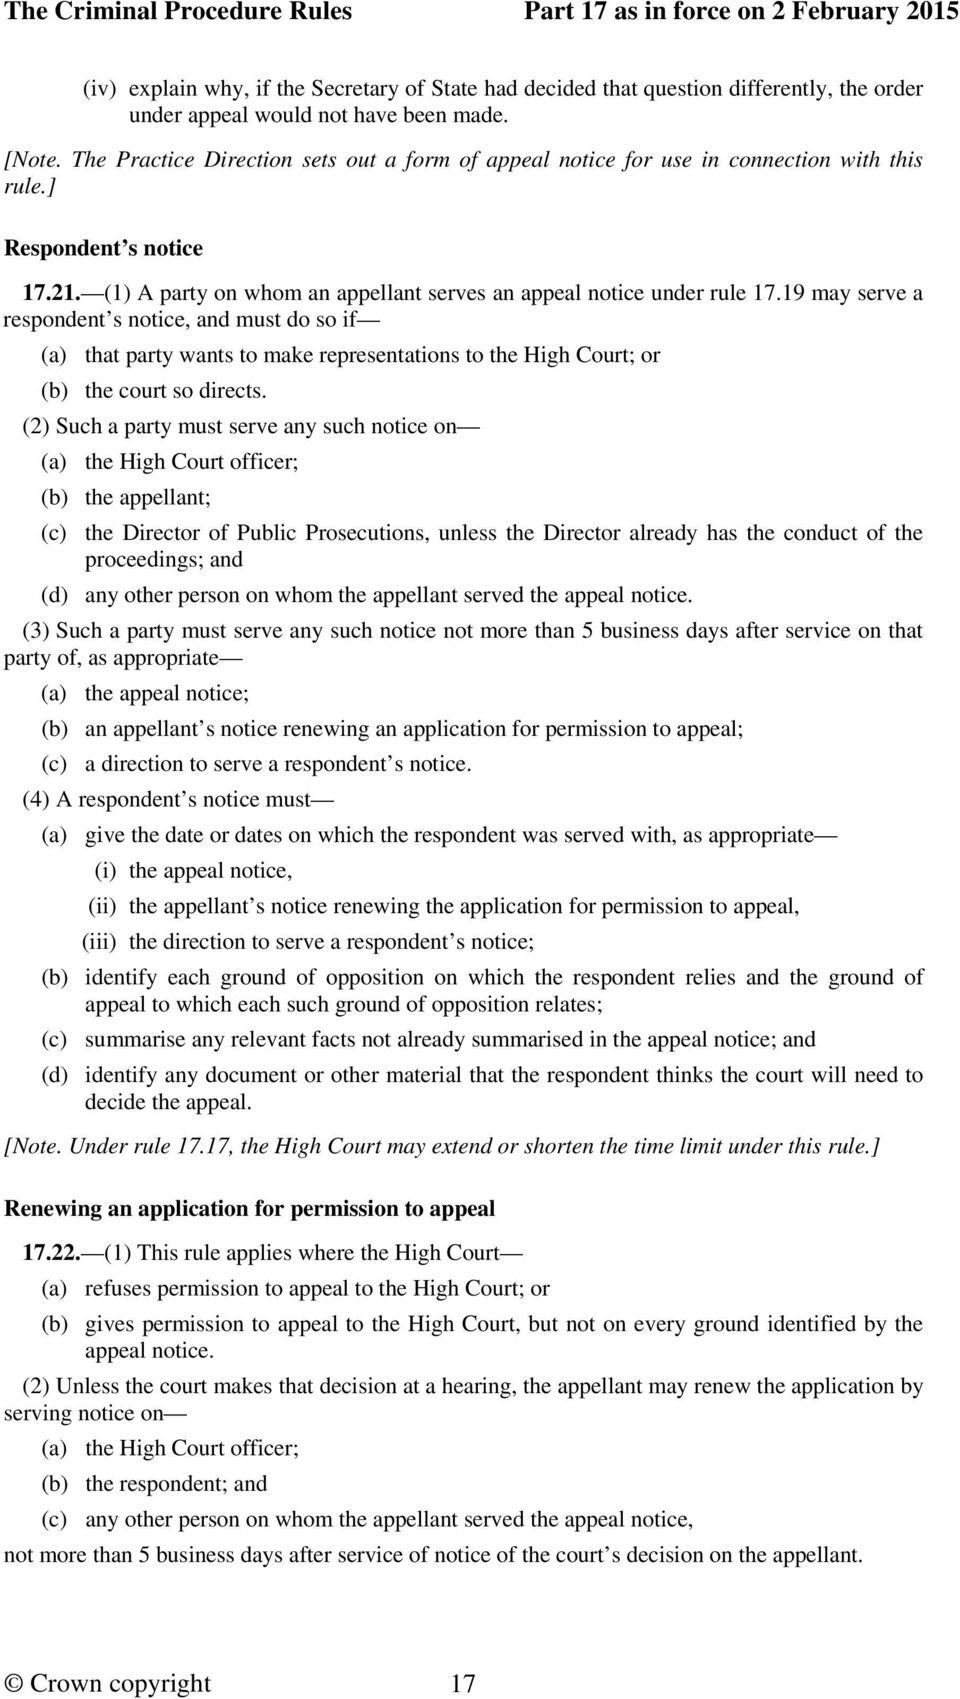 19 may serve a respondent s notice, and must do so if (a) that party wants to make representations to the High Court; or (b) the court so directs.